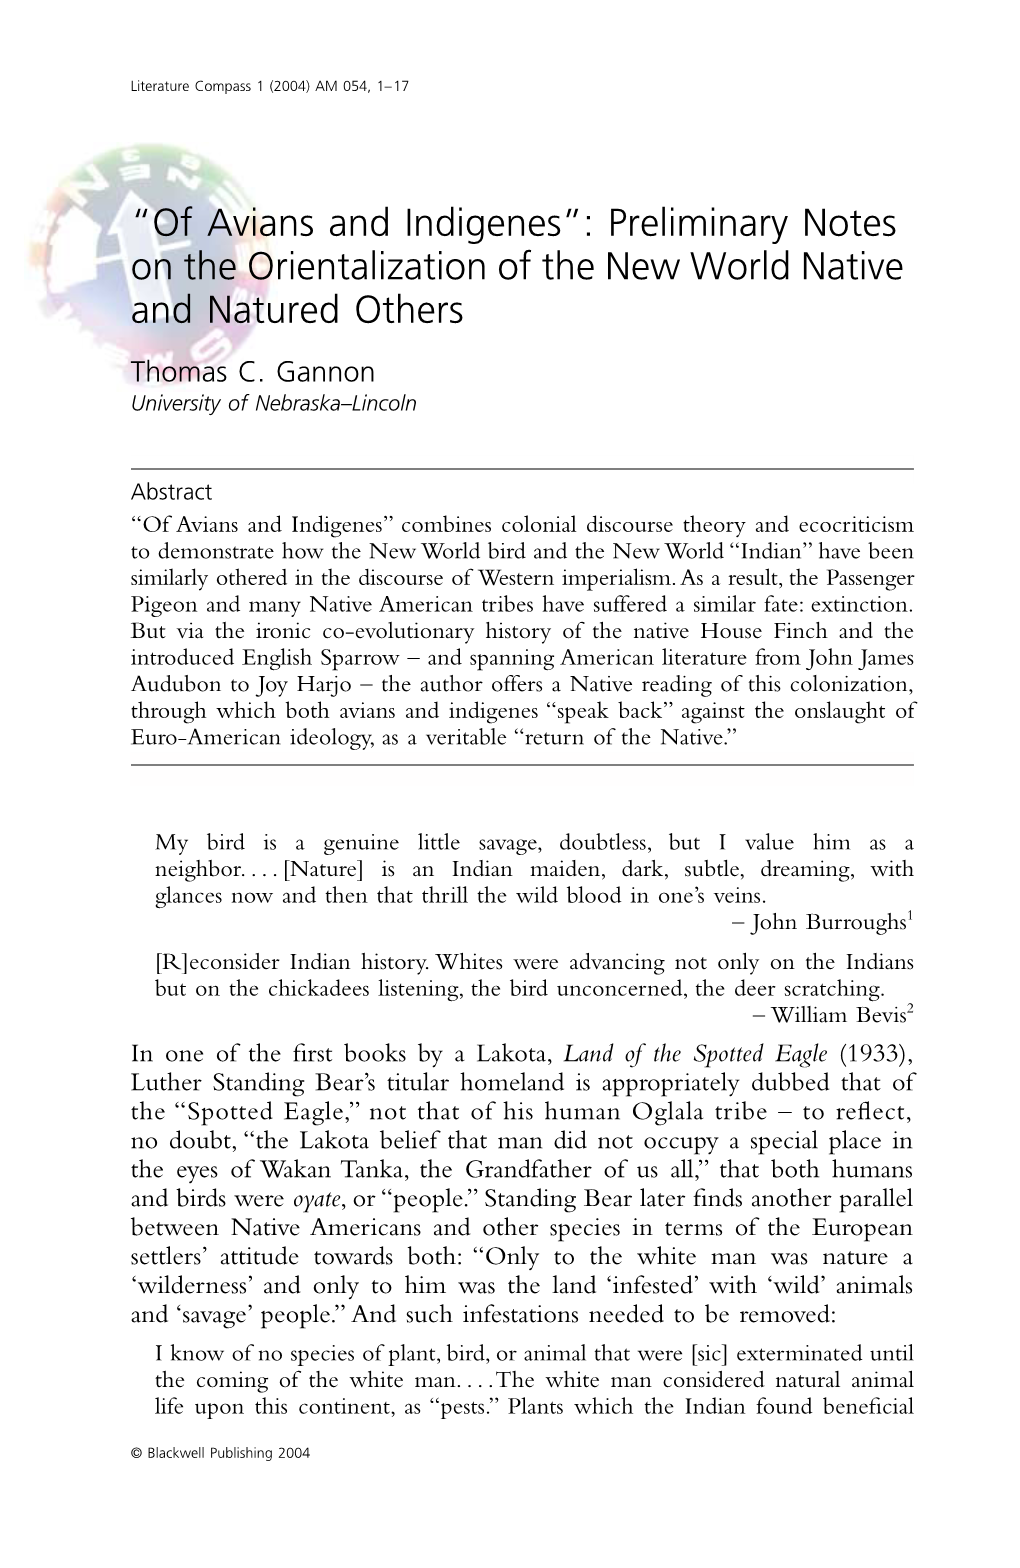 “Of Avians and Indigenes”: Preliminary Notes on the Orientalization of the New World Native and Natured Others Thomas C